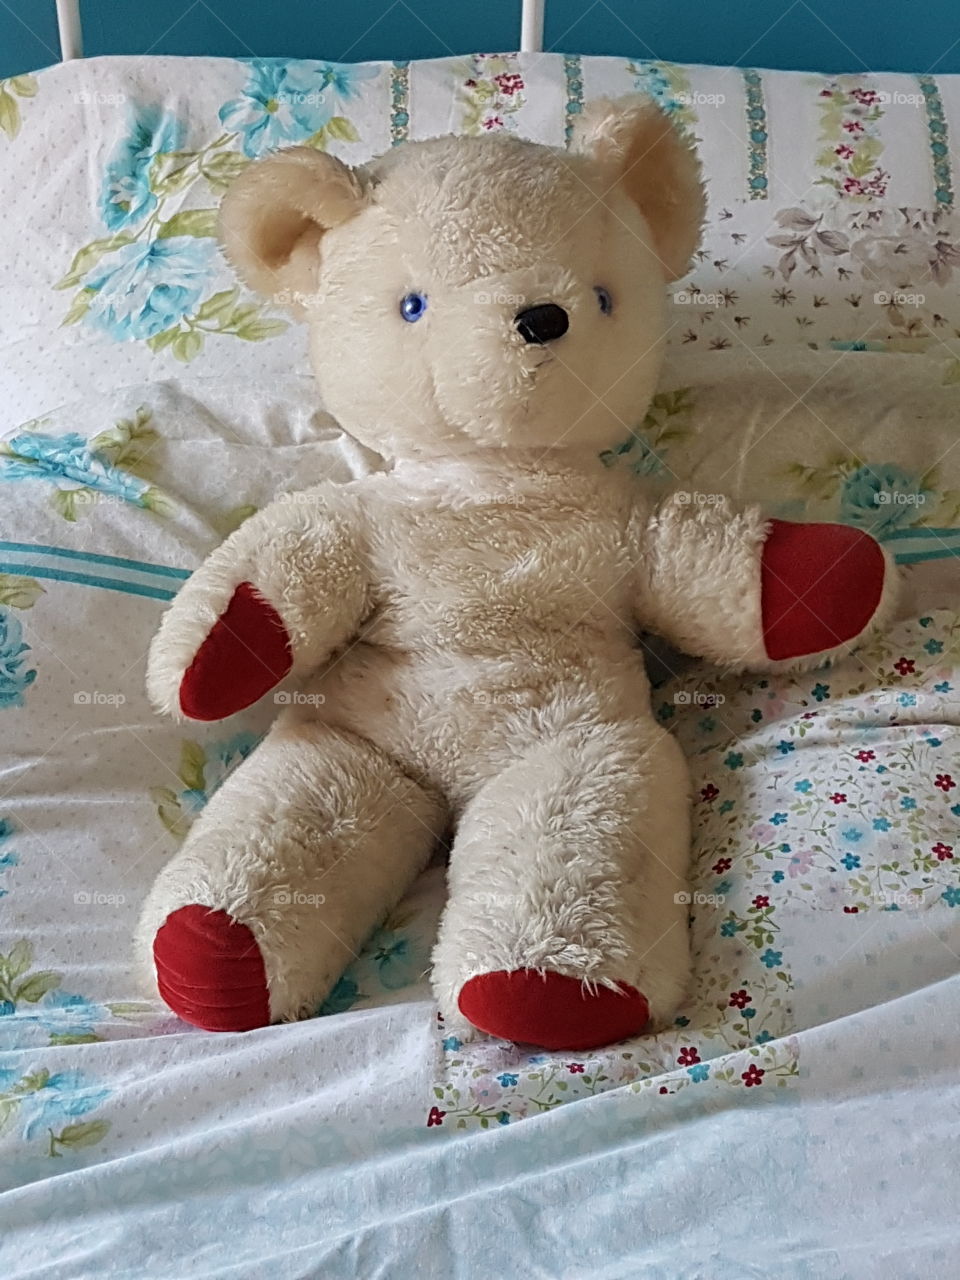 Ted on a Bed